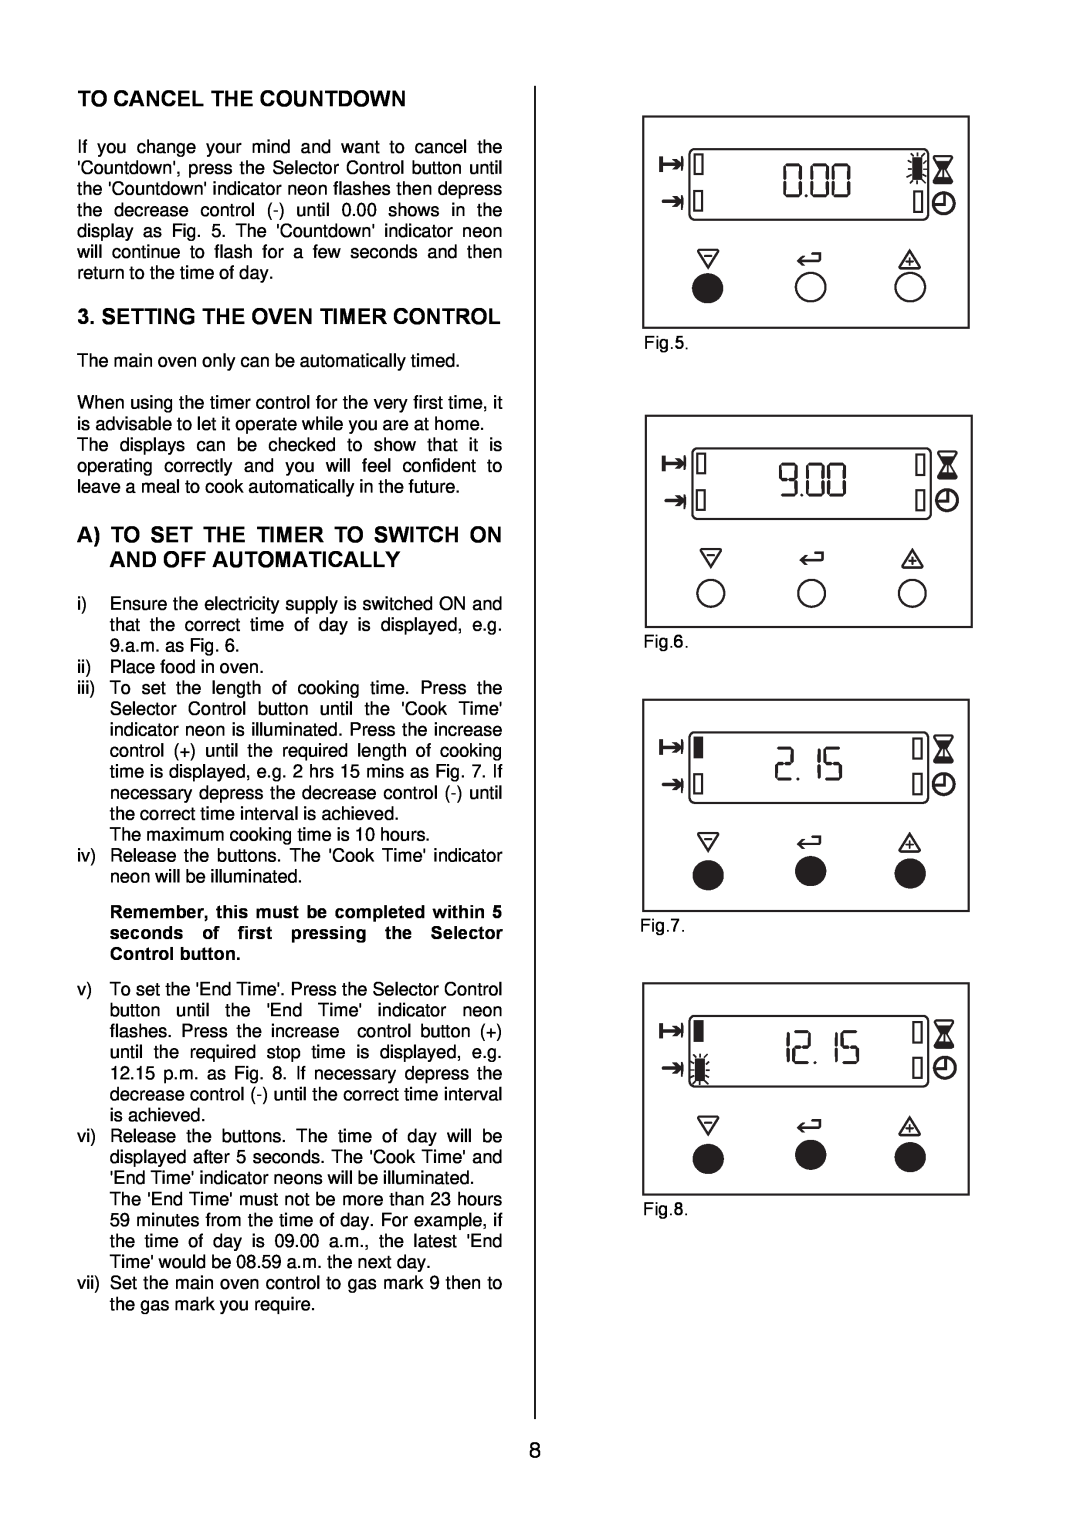 Electrolux EKG6049 user manual To Cancel The Countdown, Setting The Oven Timer Control 